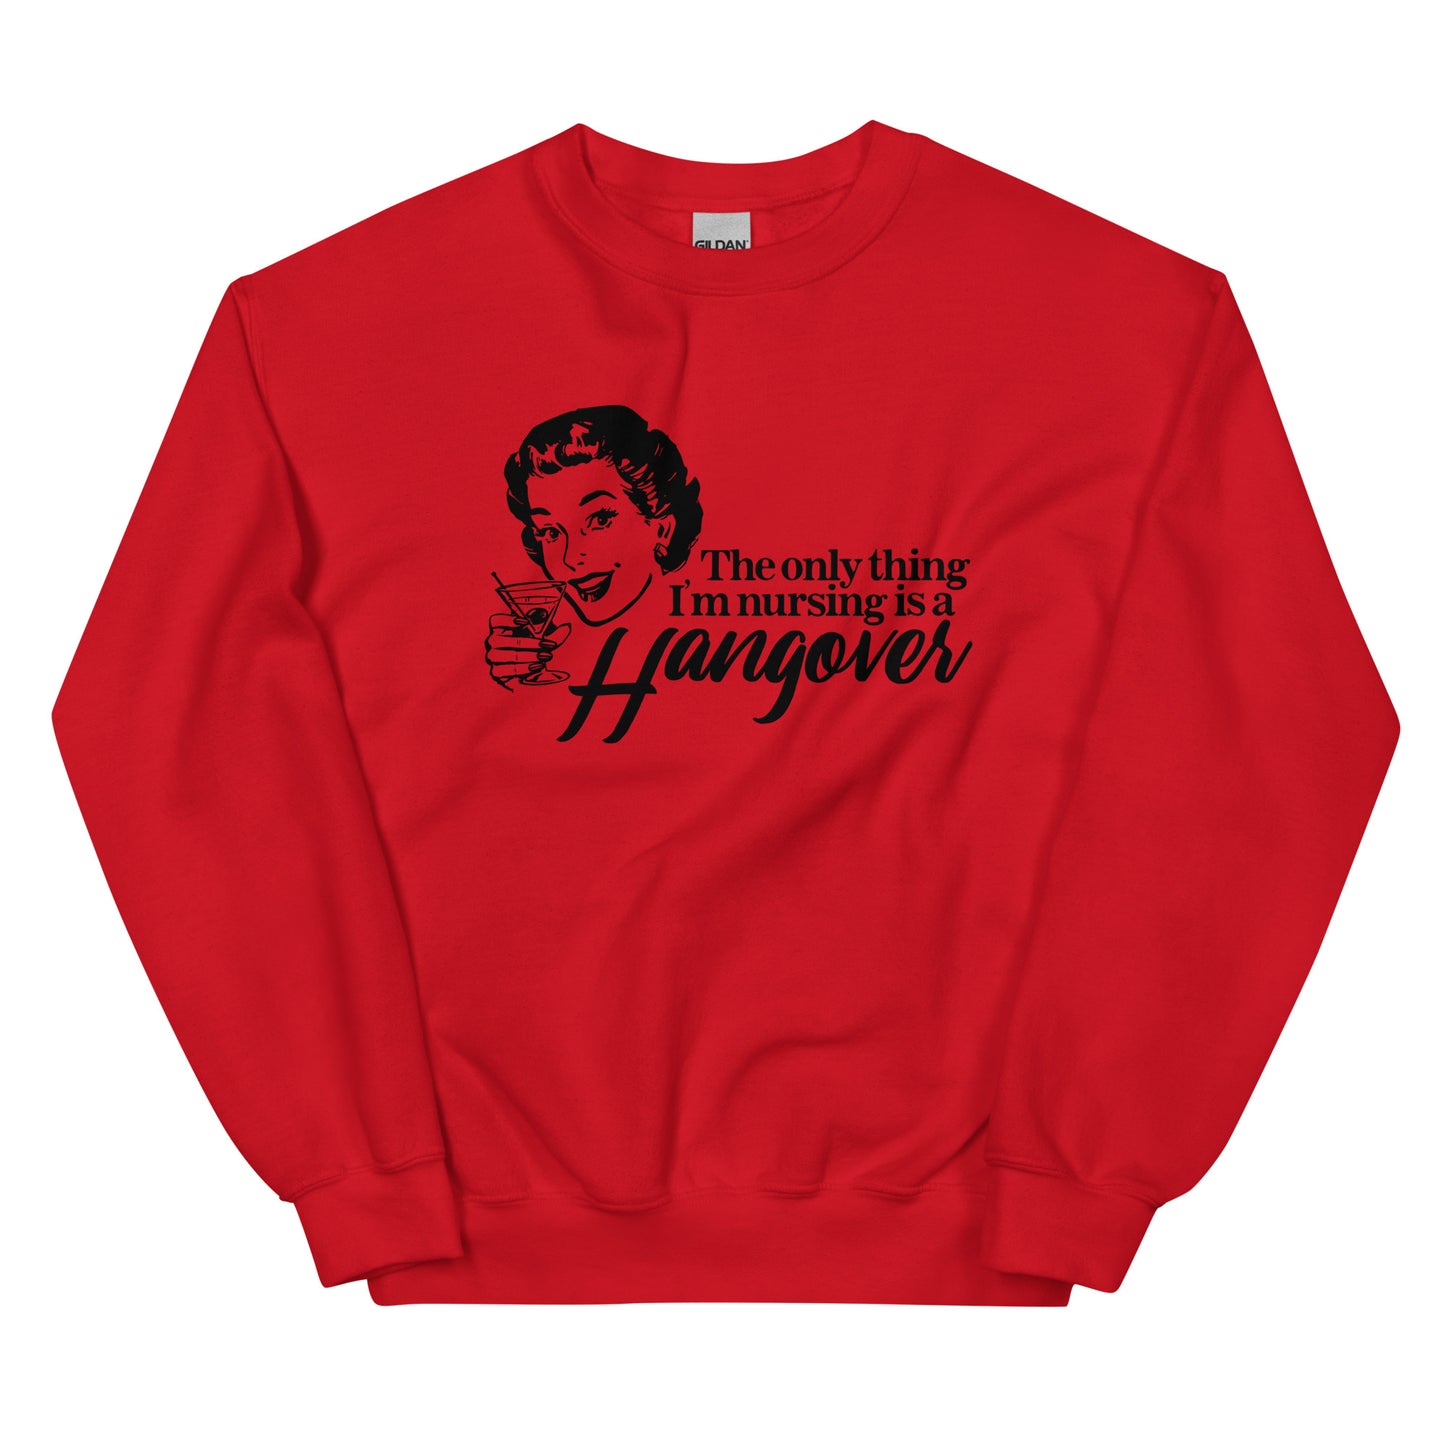 The Only Thing I'm Nursing is a Hangover Unisex Sweatshirt